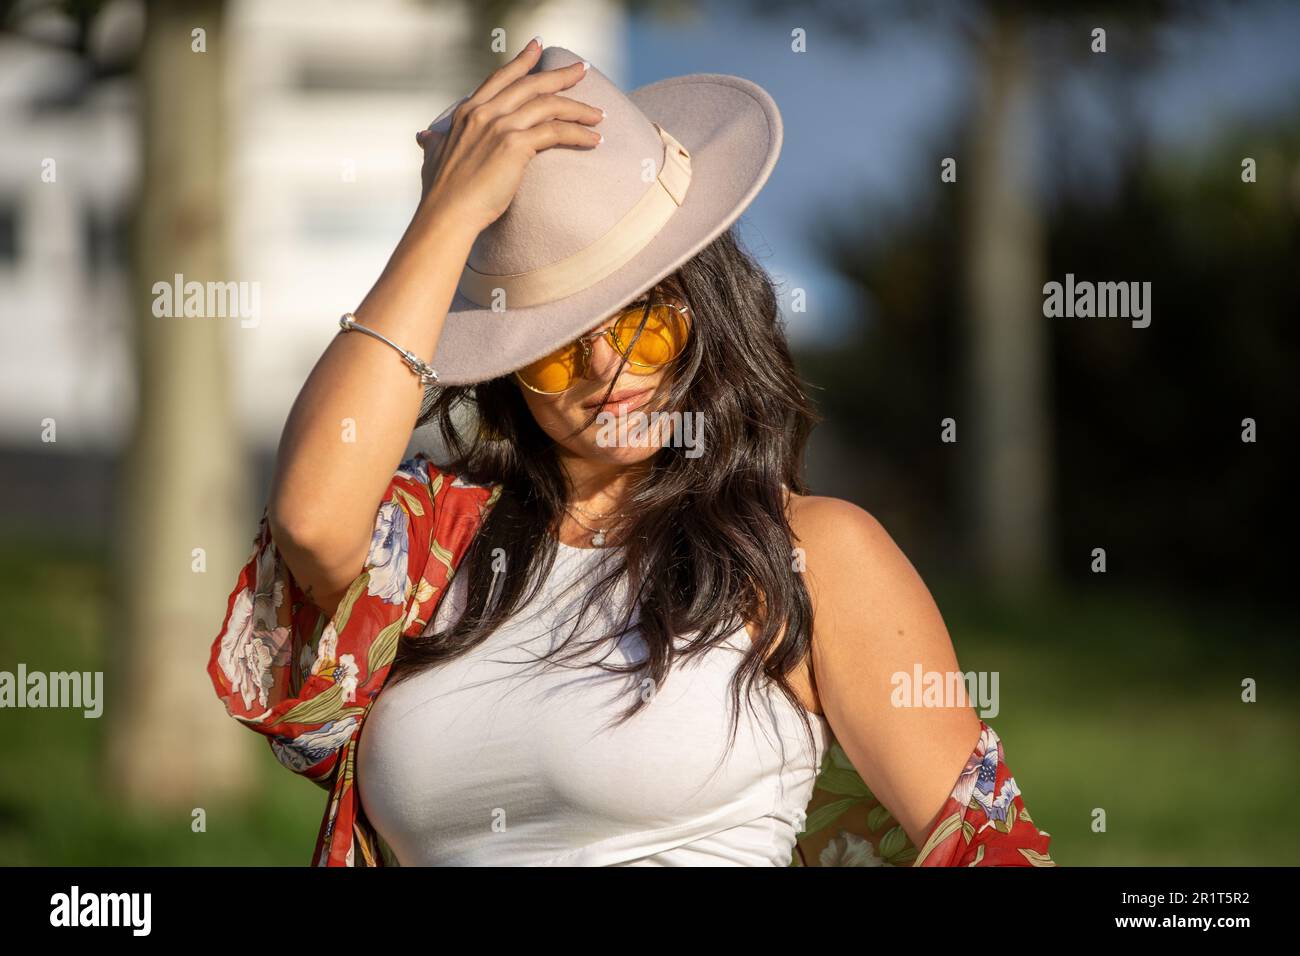 Close-up view of a stylish woman with sunglasses putting on a hat on her head while standing outdoors on a sunny day. Stock Photo